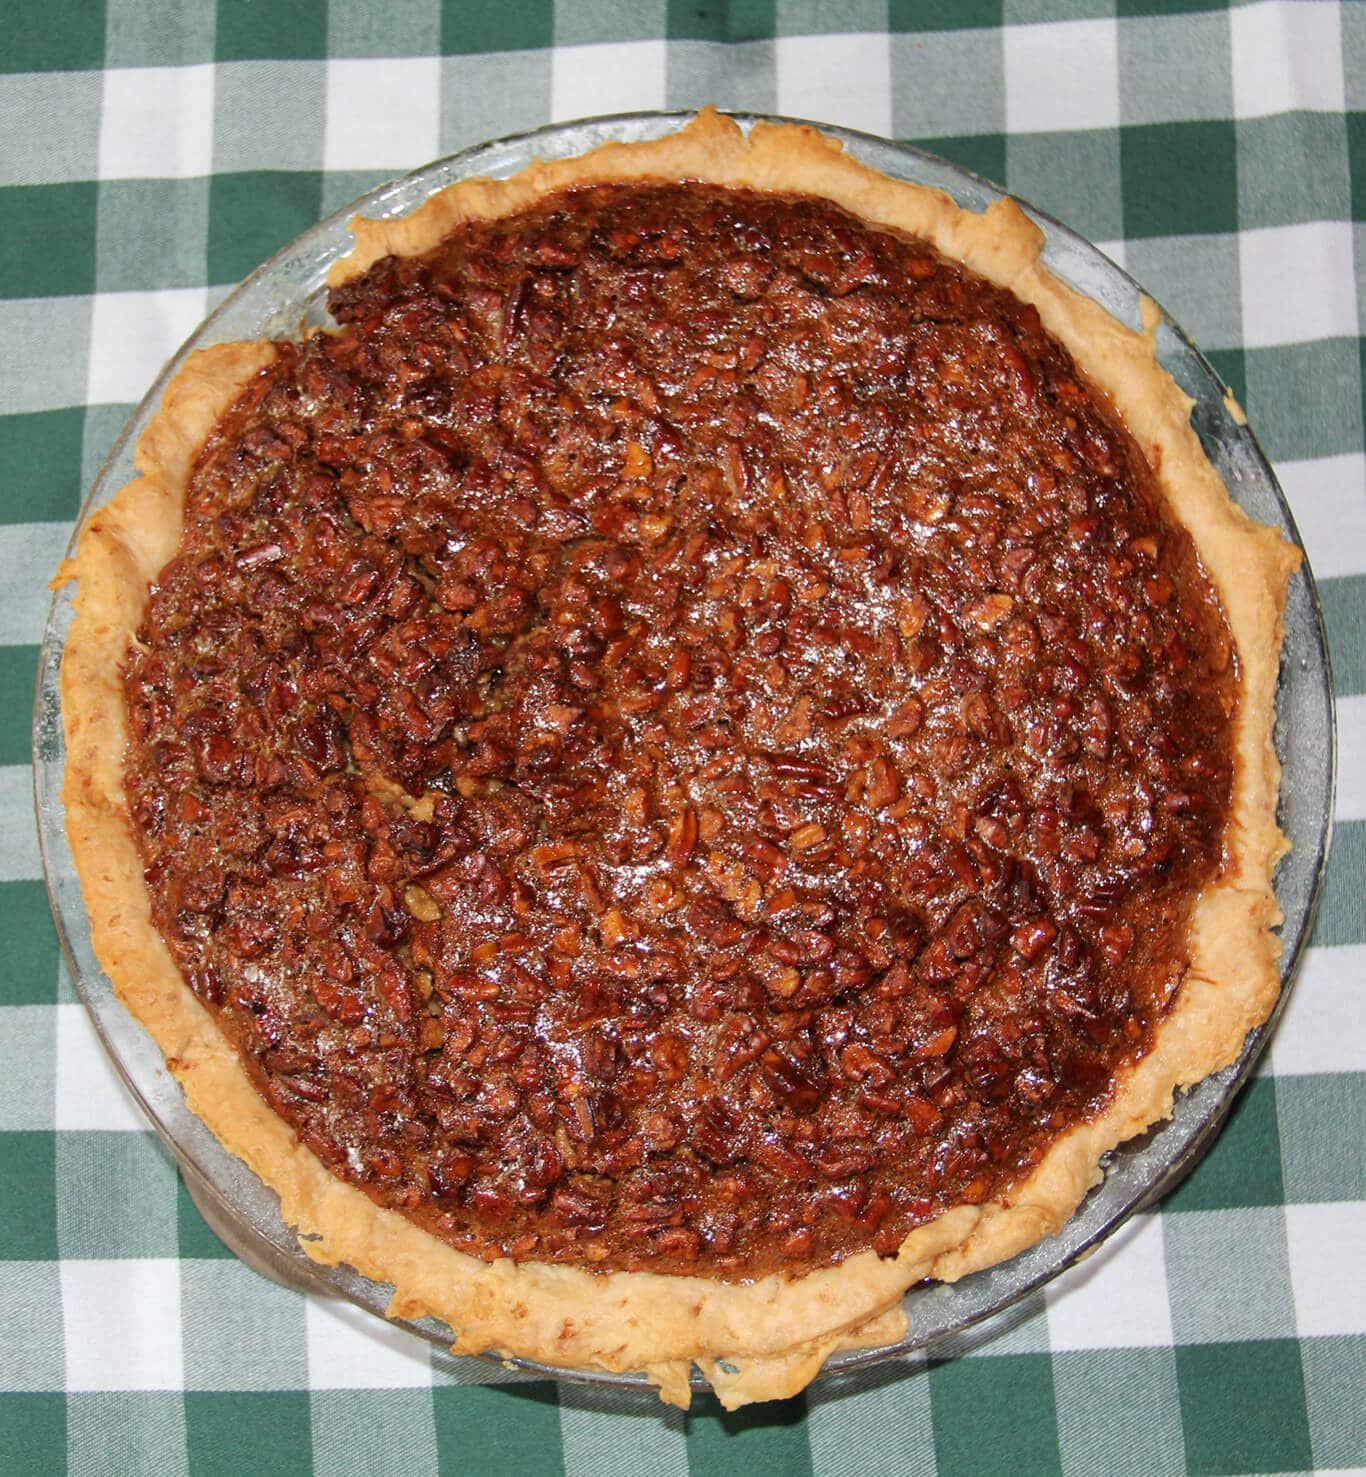 Southern Pecan Pie
 Southern Pecan Pie made with Real Cane Syrup for Richer Flavor